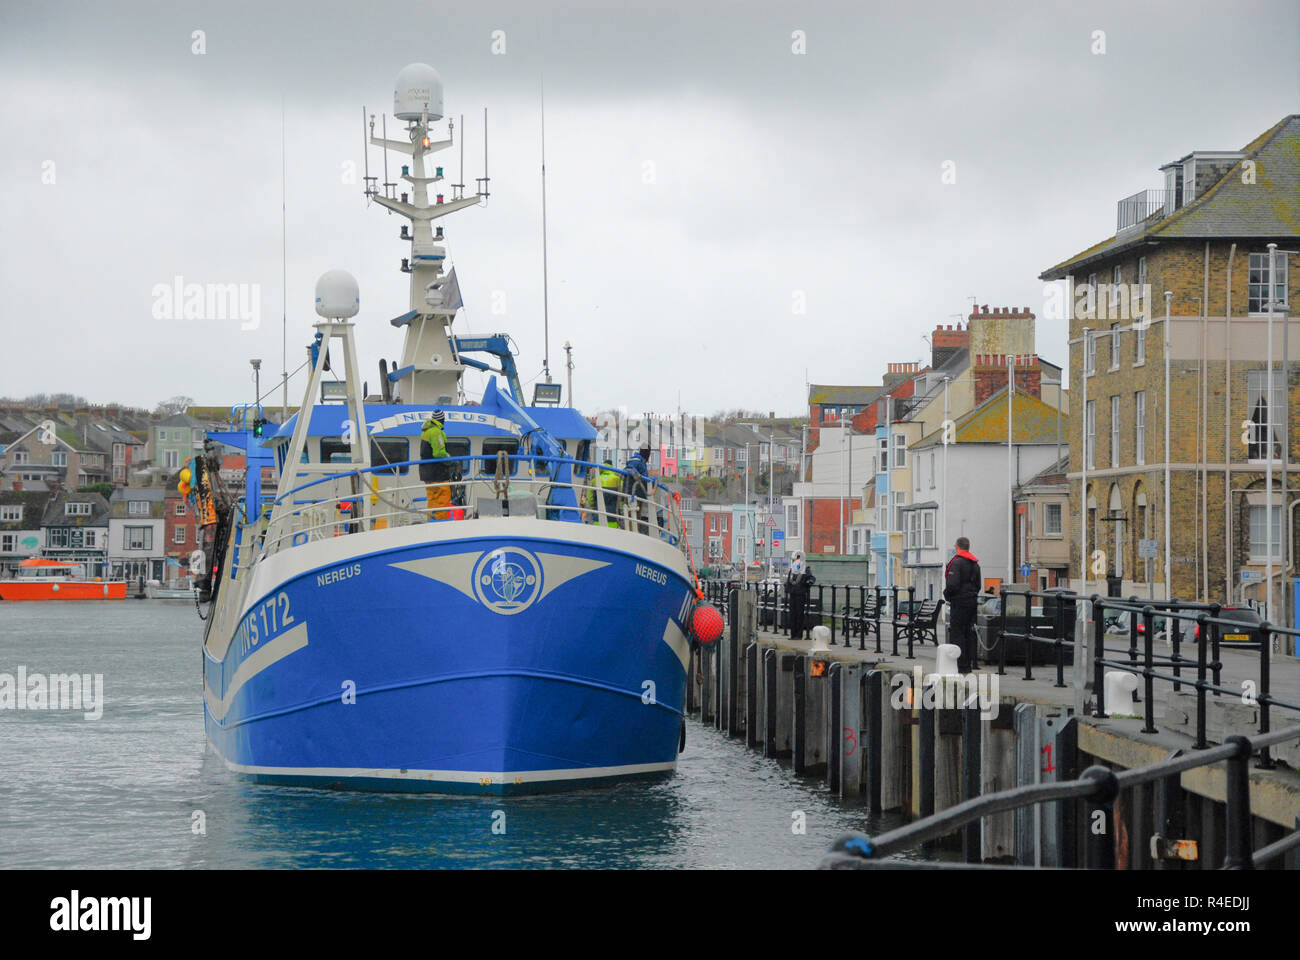 Weymouth, Dorset. 27th November 2018. The 19m twin-rig freezer prawn trawler, MV Nereus, berths in Weymouth harbour after a night spent fishing at sea in atrocious weather Credit: stuart fretwell/Alamy Live News Stock Photo